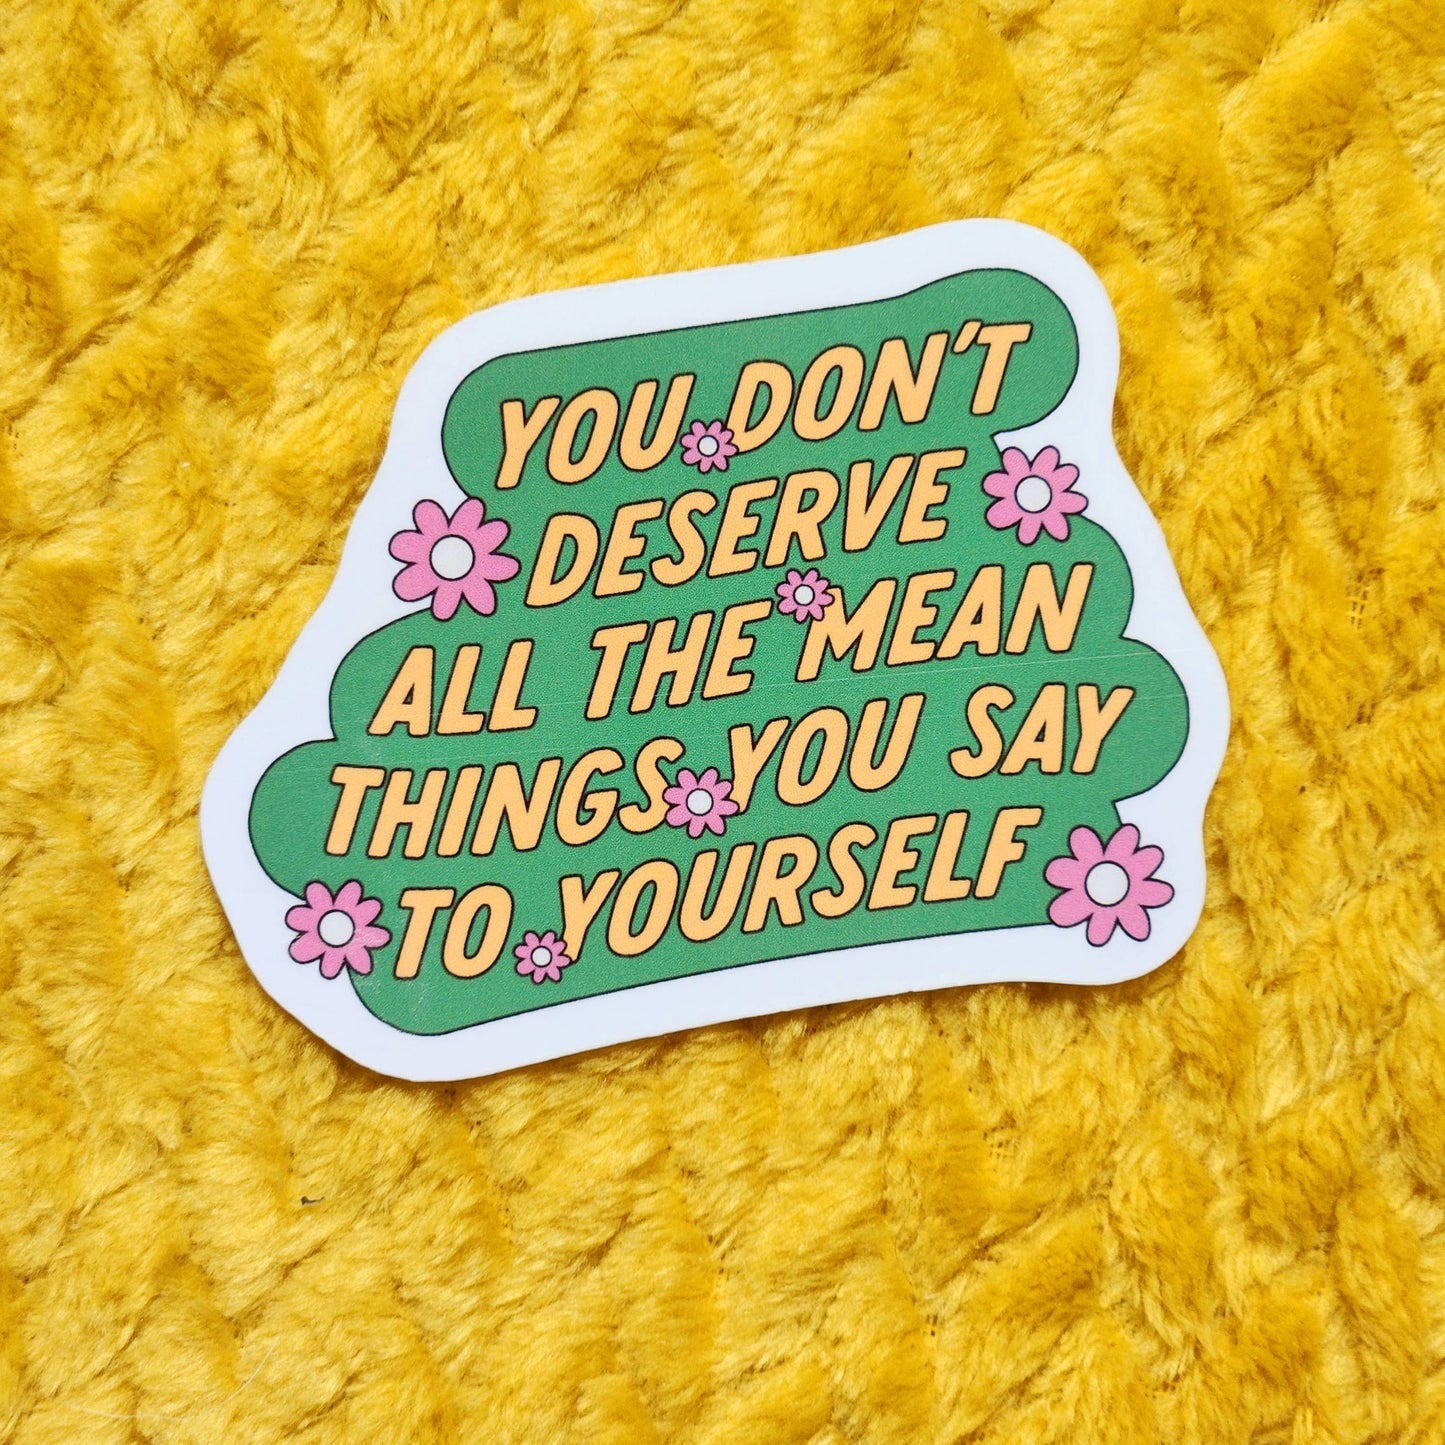 You don't deserve mean things sticker mental health: White